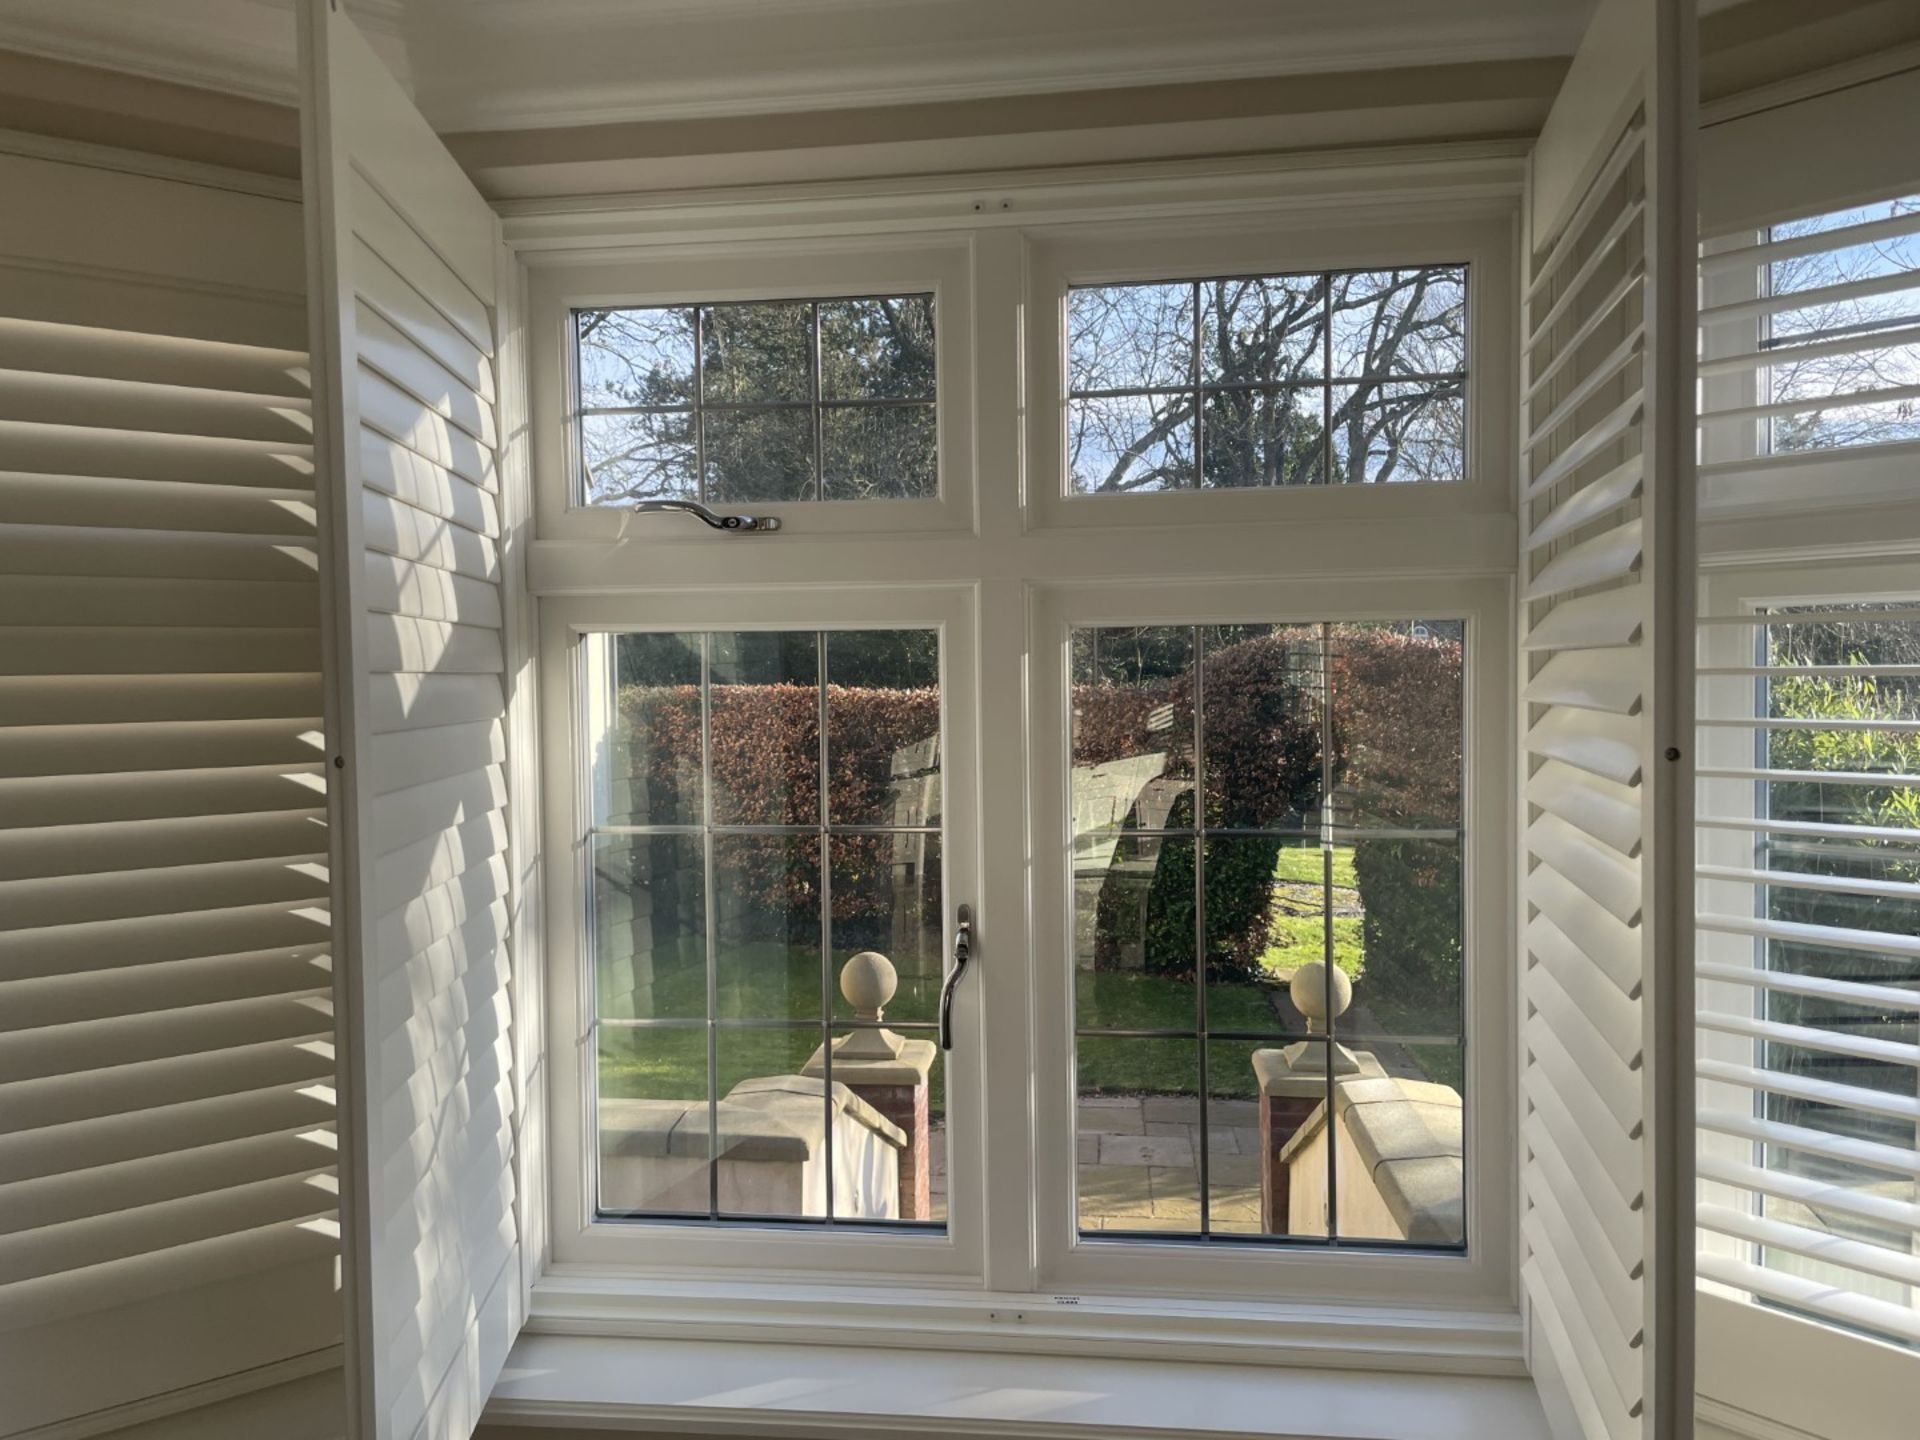 1 x Hardwood Timber Double Glazed Window Frames fitted with Shutter Blinds, In White - Ref: PAN101 - Image 11 of 23